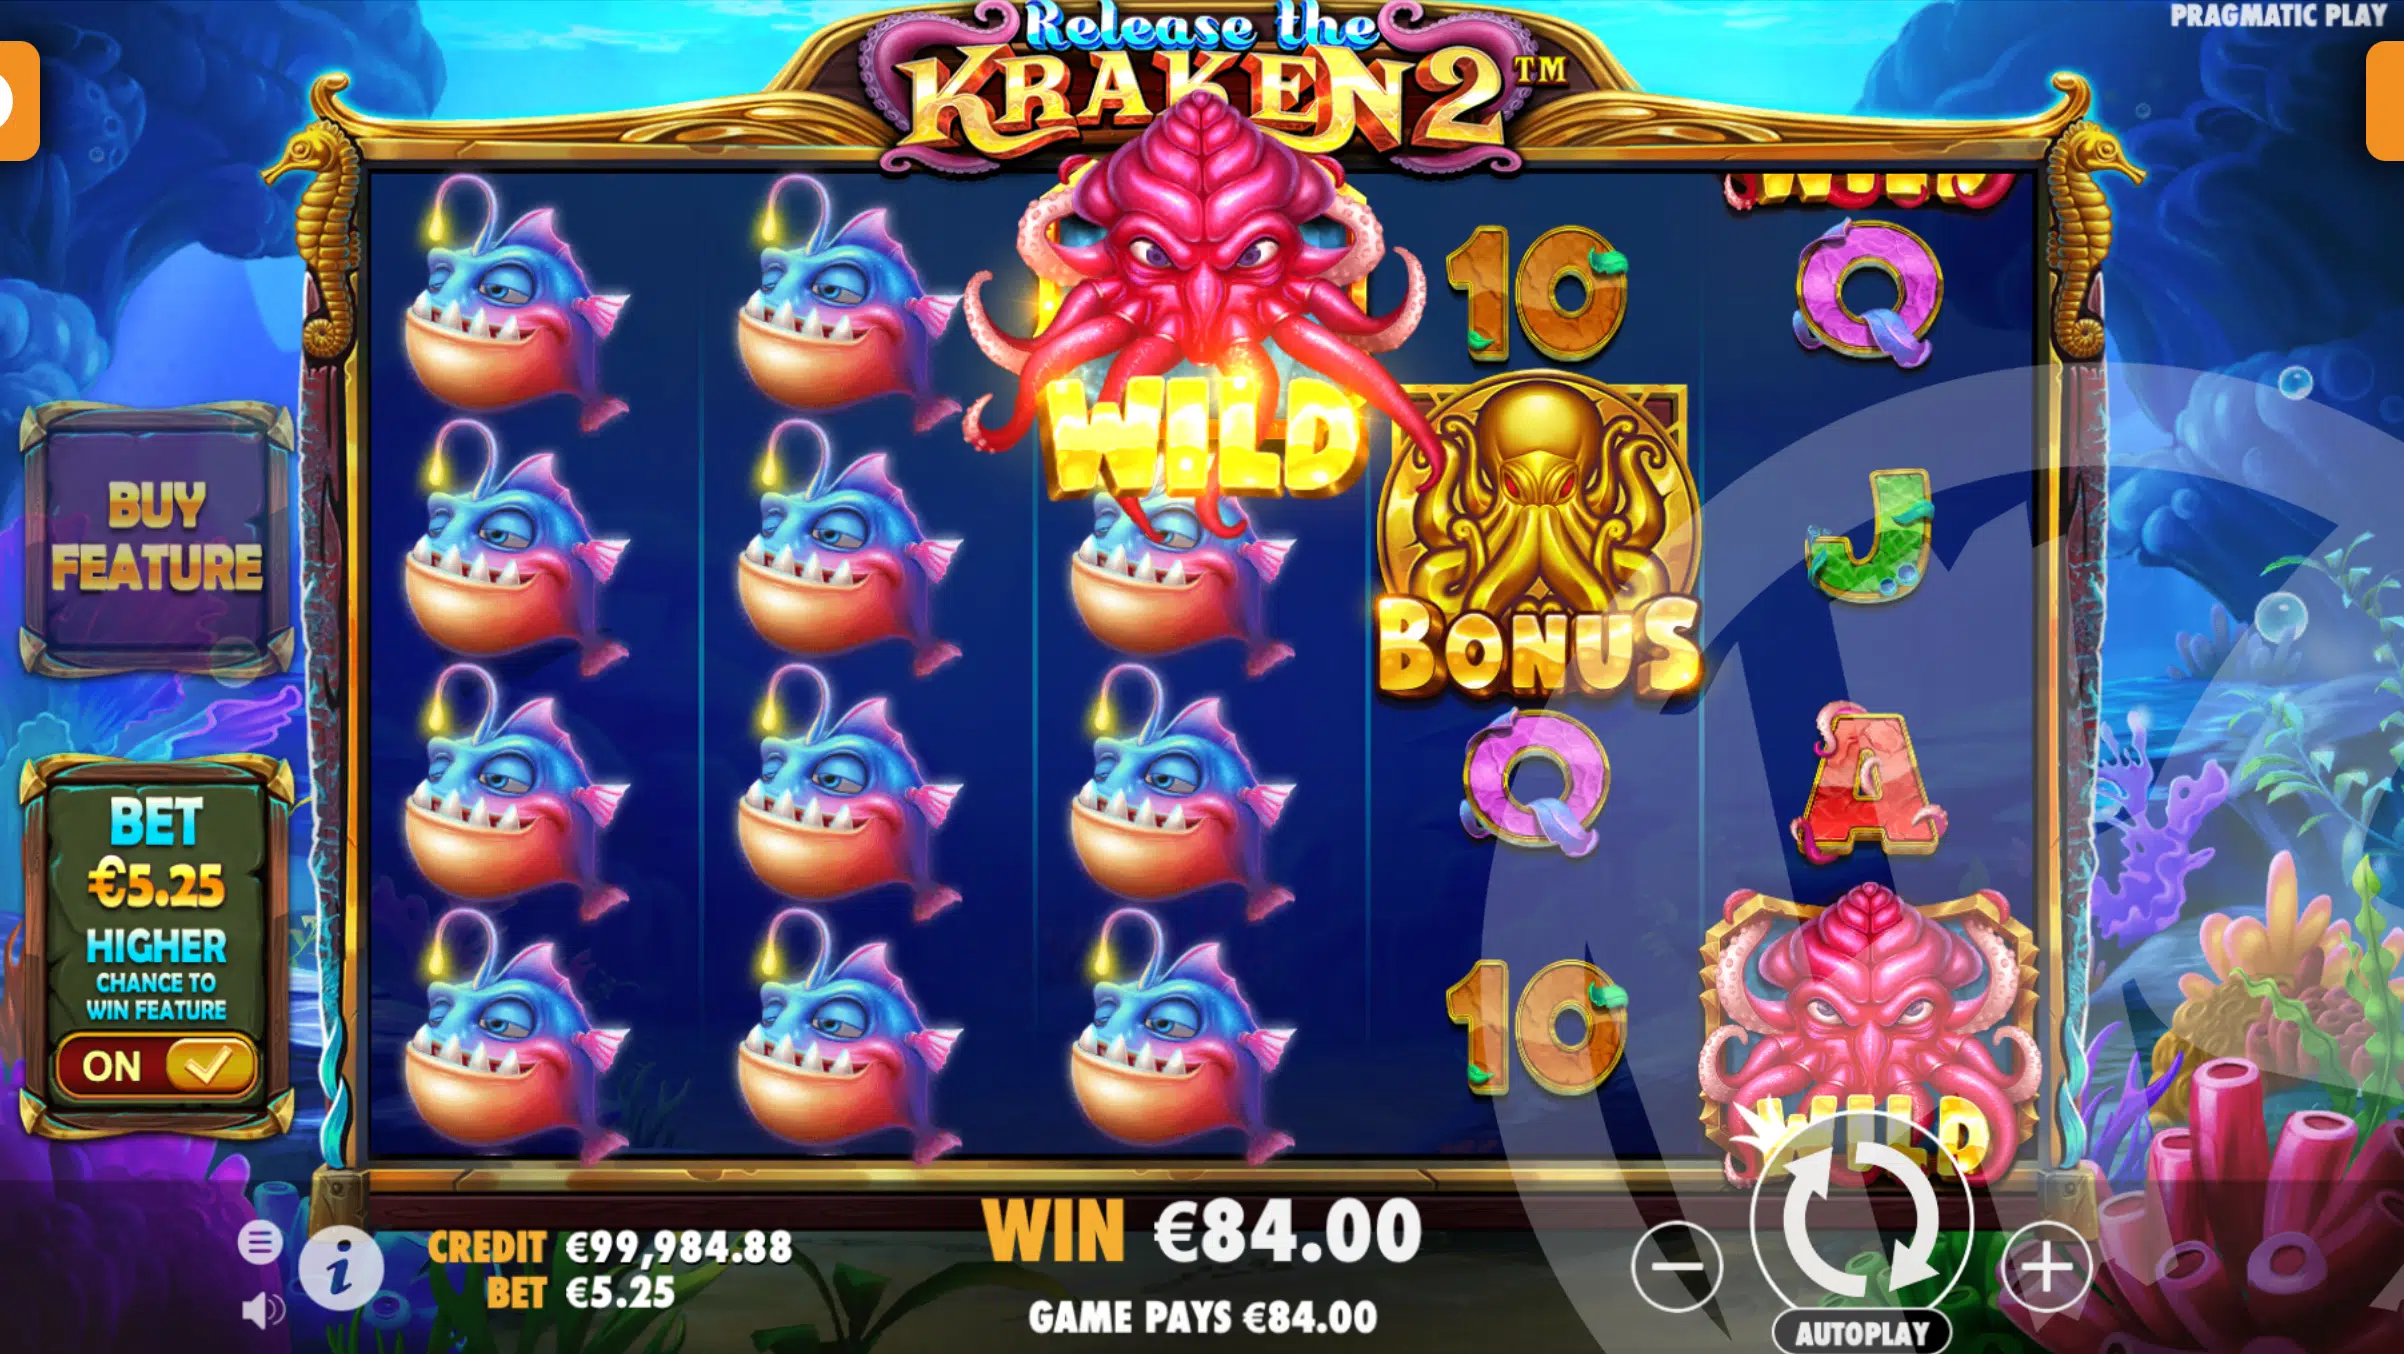 Release the Kraken 2 Offers Players 20-40 Fixed Win Lines